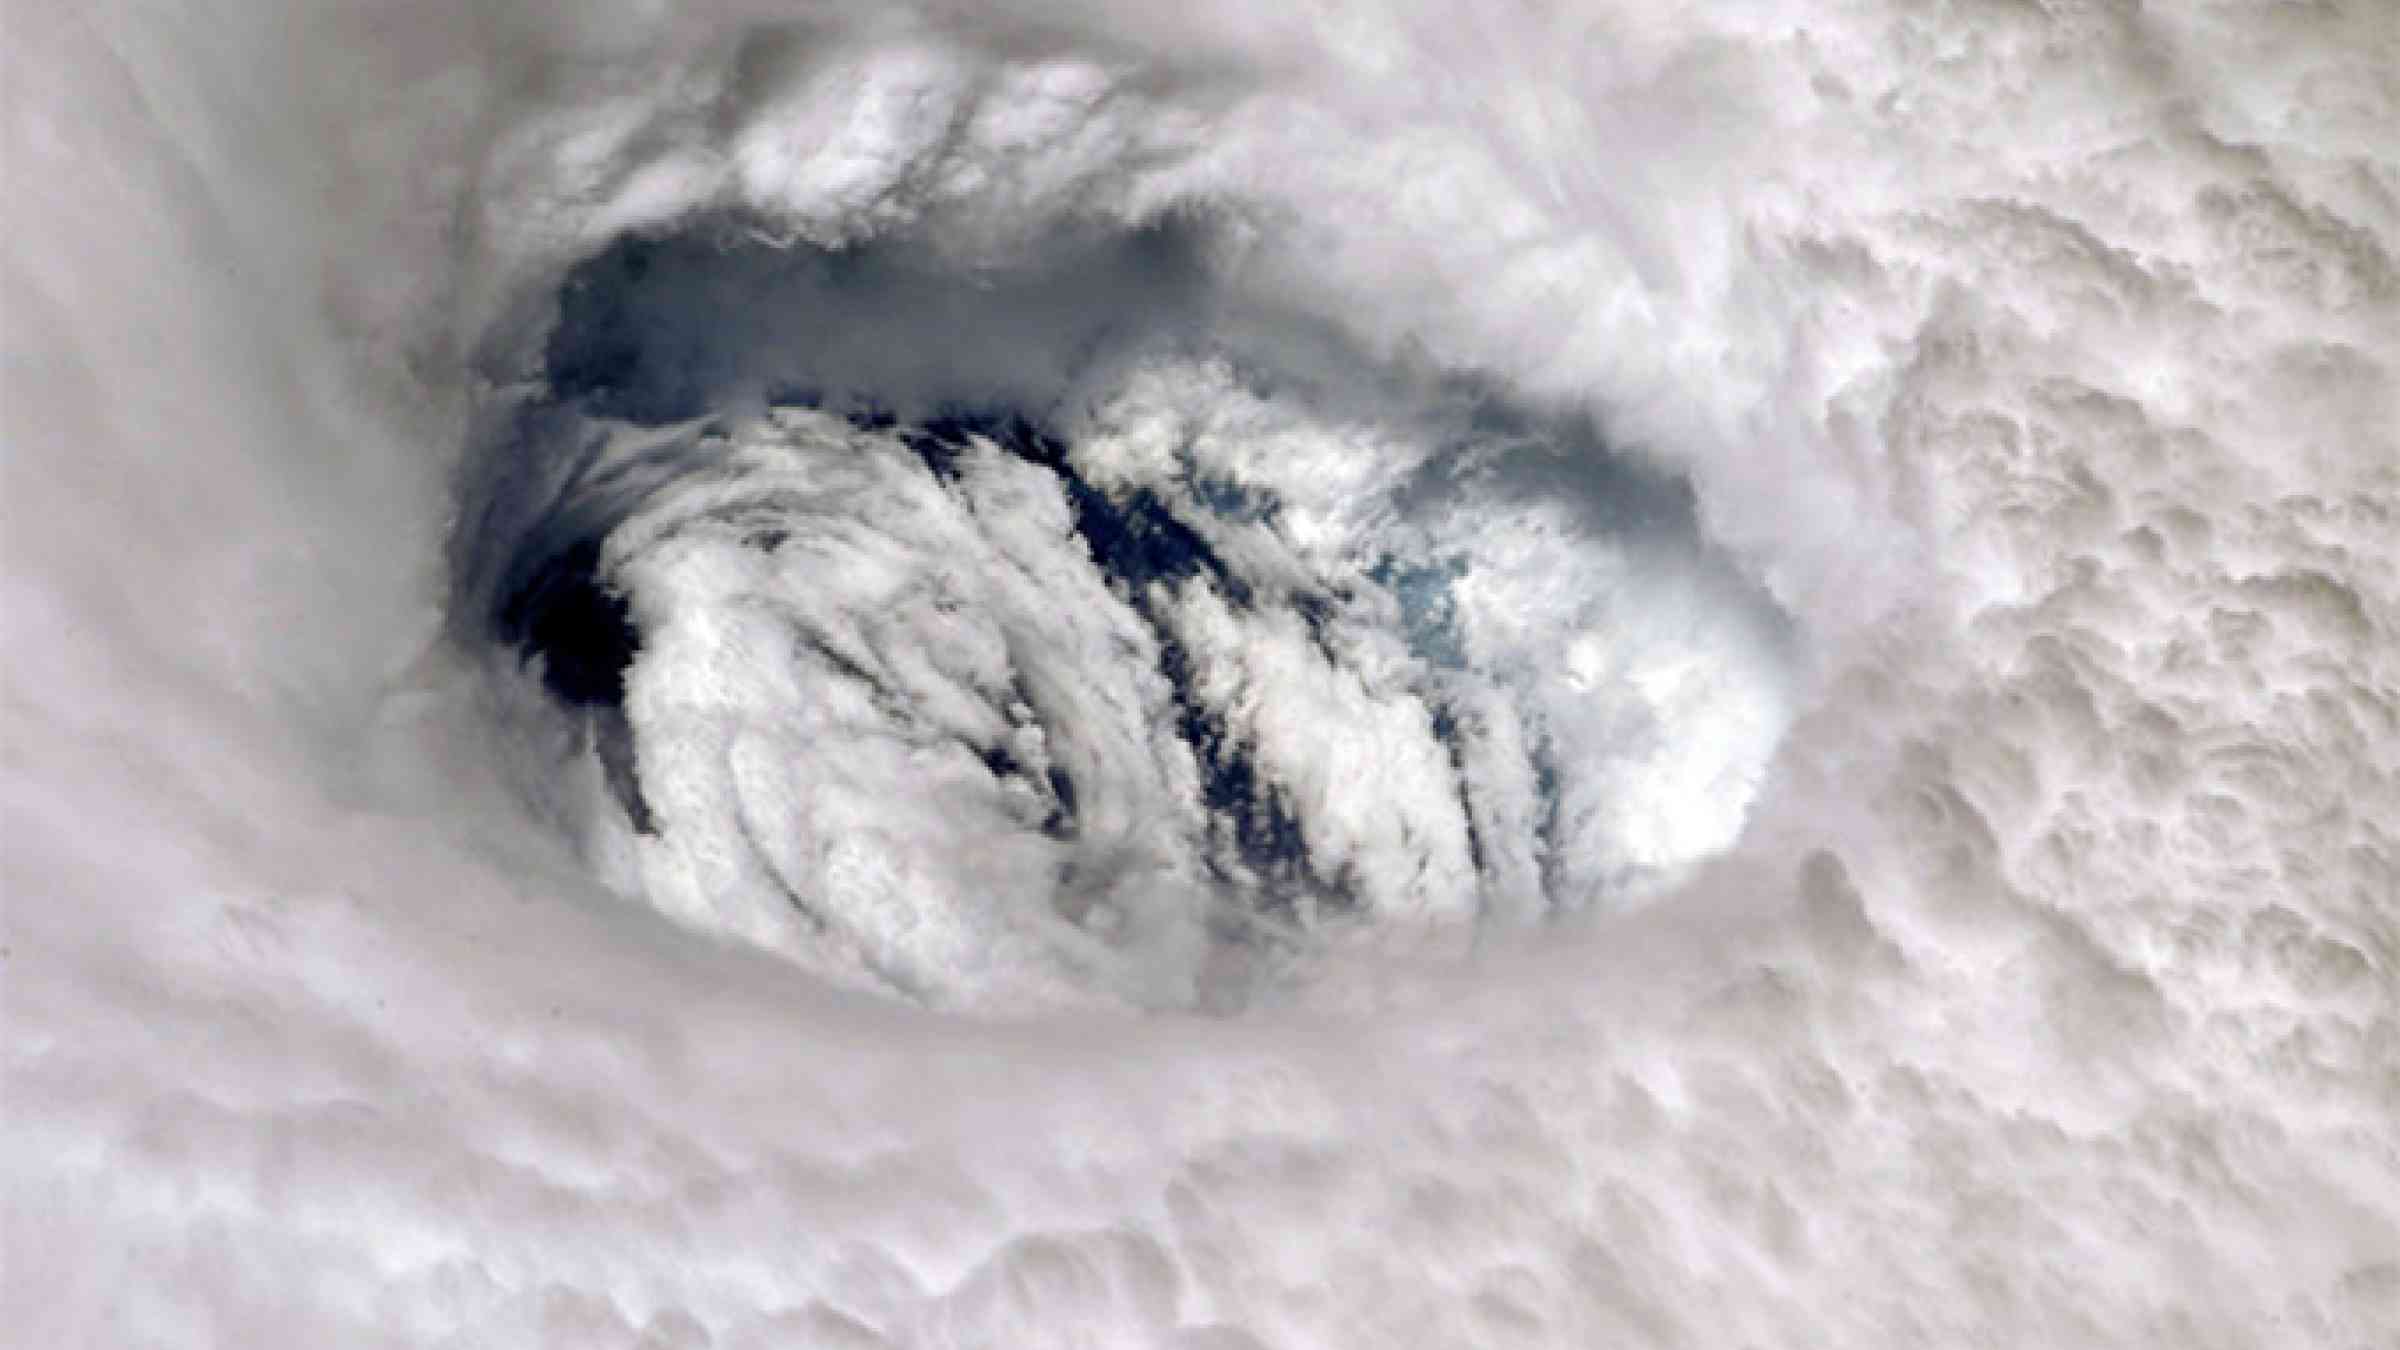 Astronaut Nick Hague captured the foreboding eye of Hurricane Dorian on 2 September 2019 from the International Space Station. Dorian, a category 5 hurricane, left a path of devastation in the Bahamas. Credit: Nick Hague/NASA